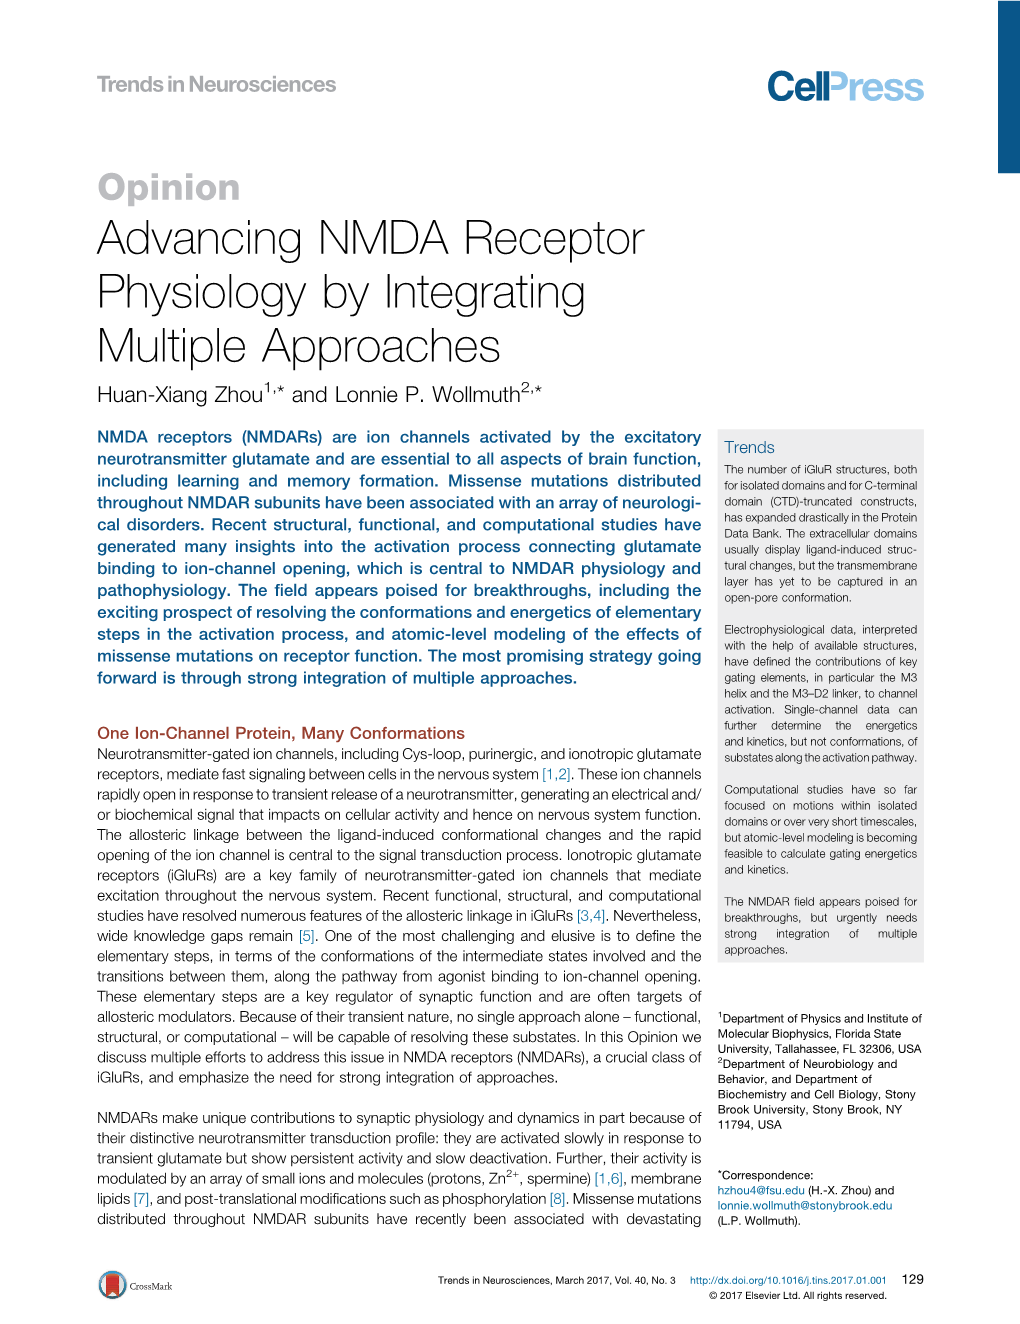 Advancing NMDA Receptor Physiology by Integrating Multiple Approaches Huan-Xiang Zhou1,* and Lonnie P